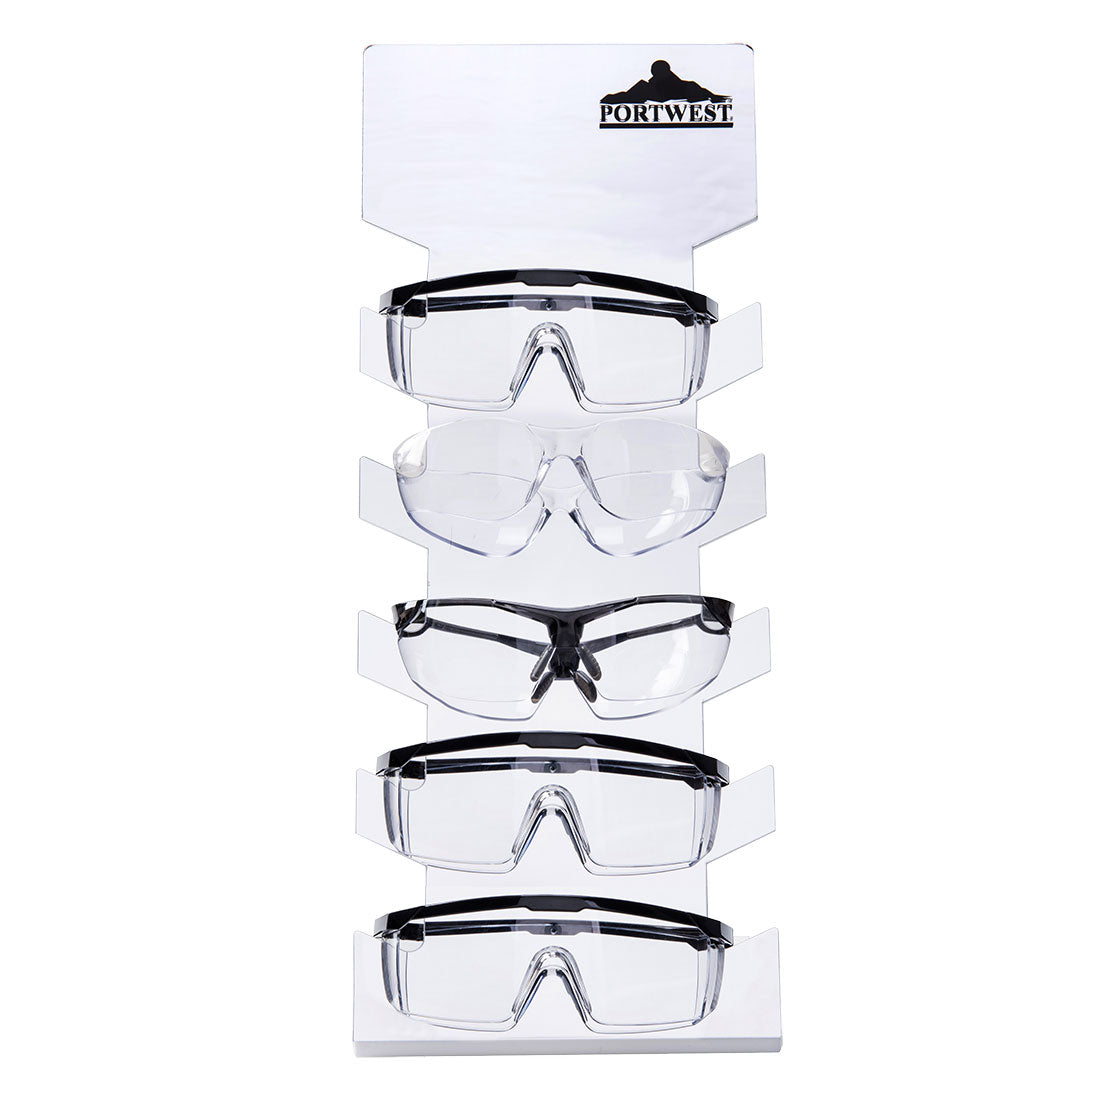 Z529 - Glasses Display Stand - BRITE SAFETY